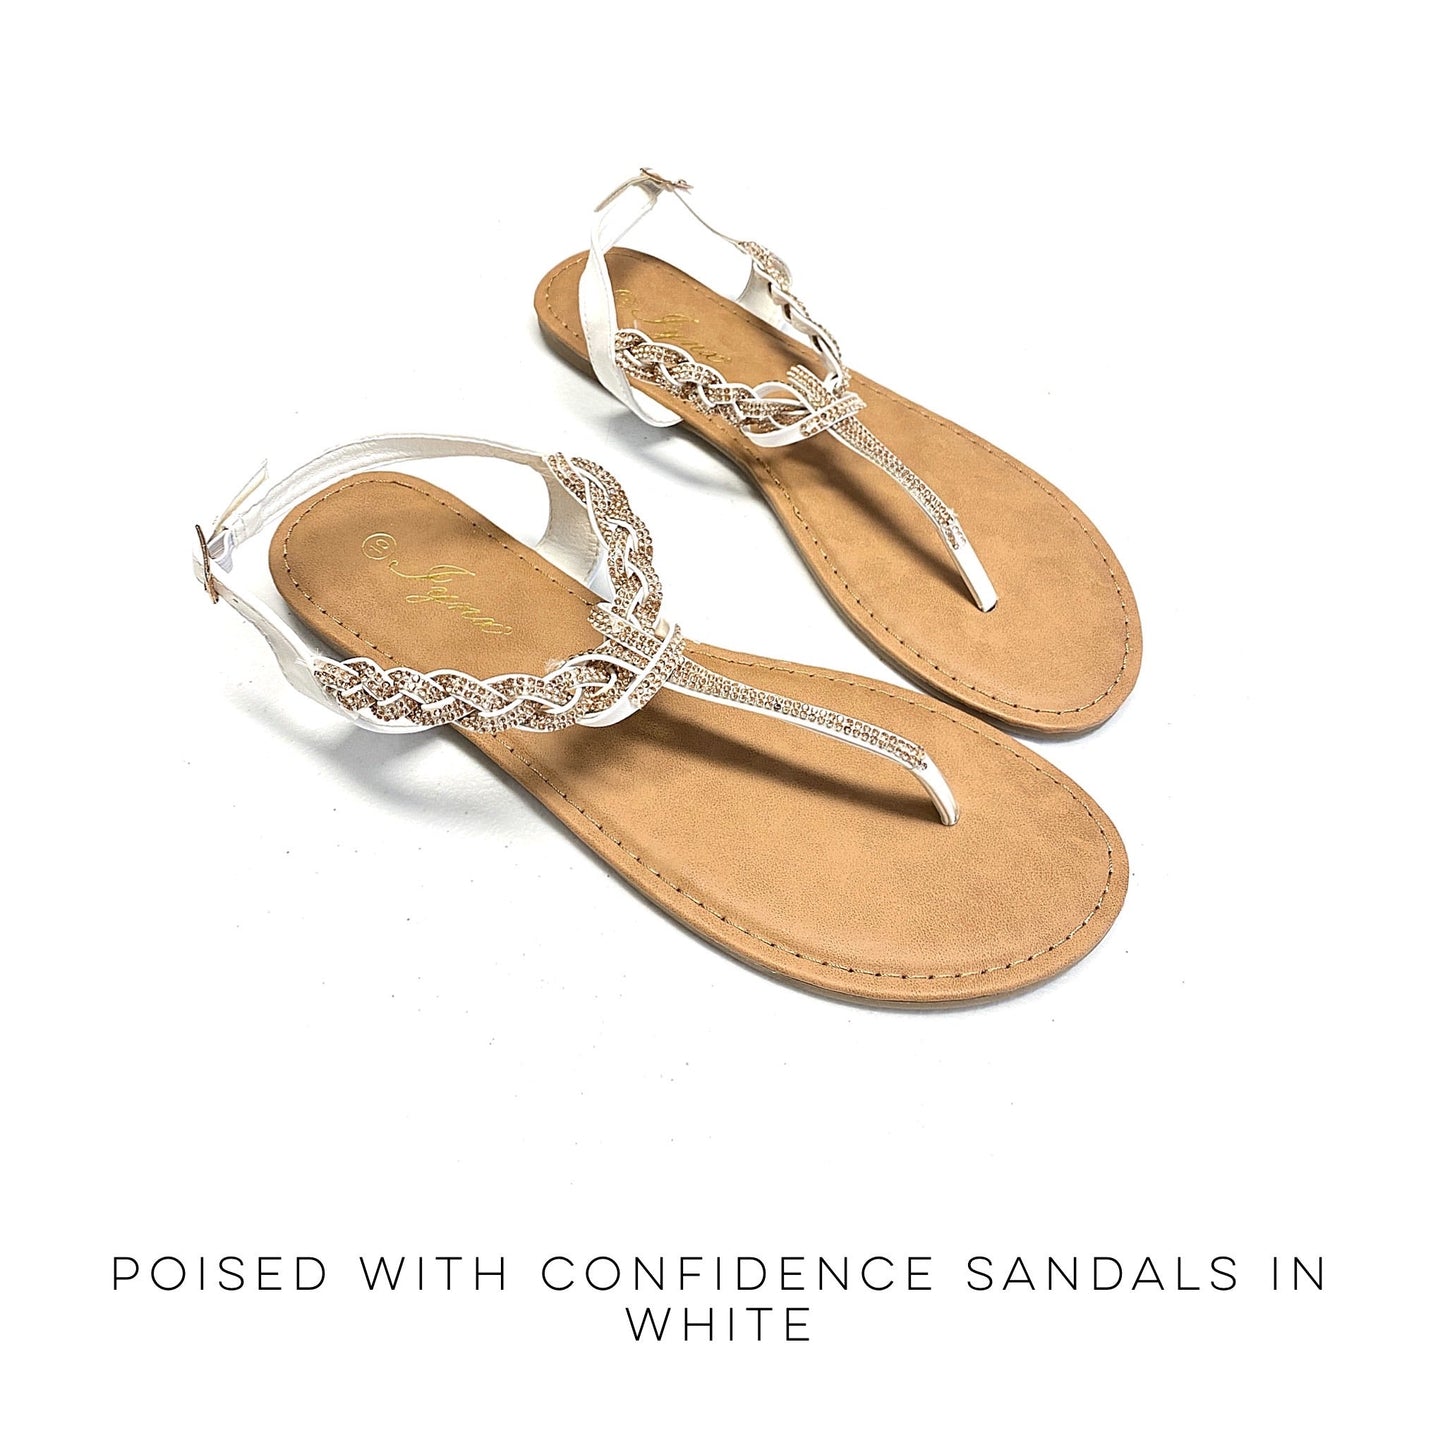 Poised with Confidence Sandals in White